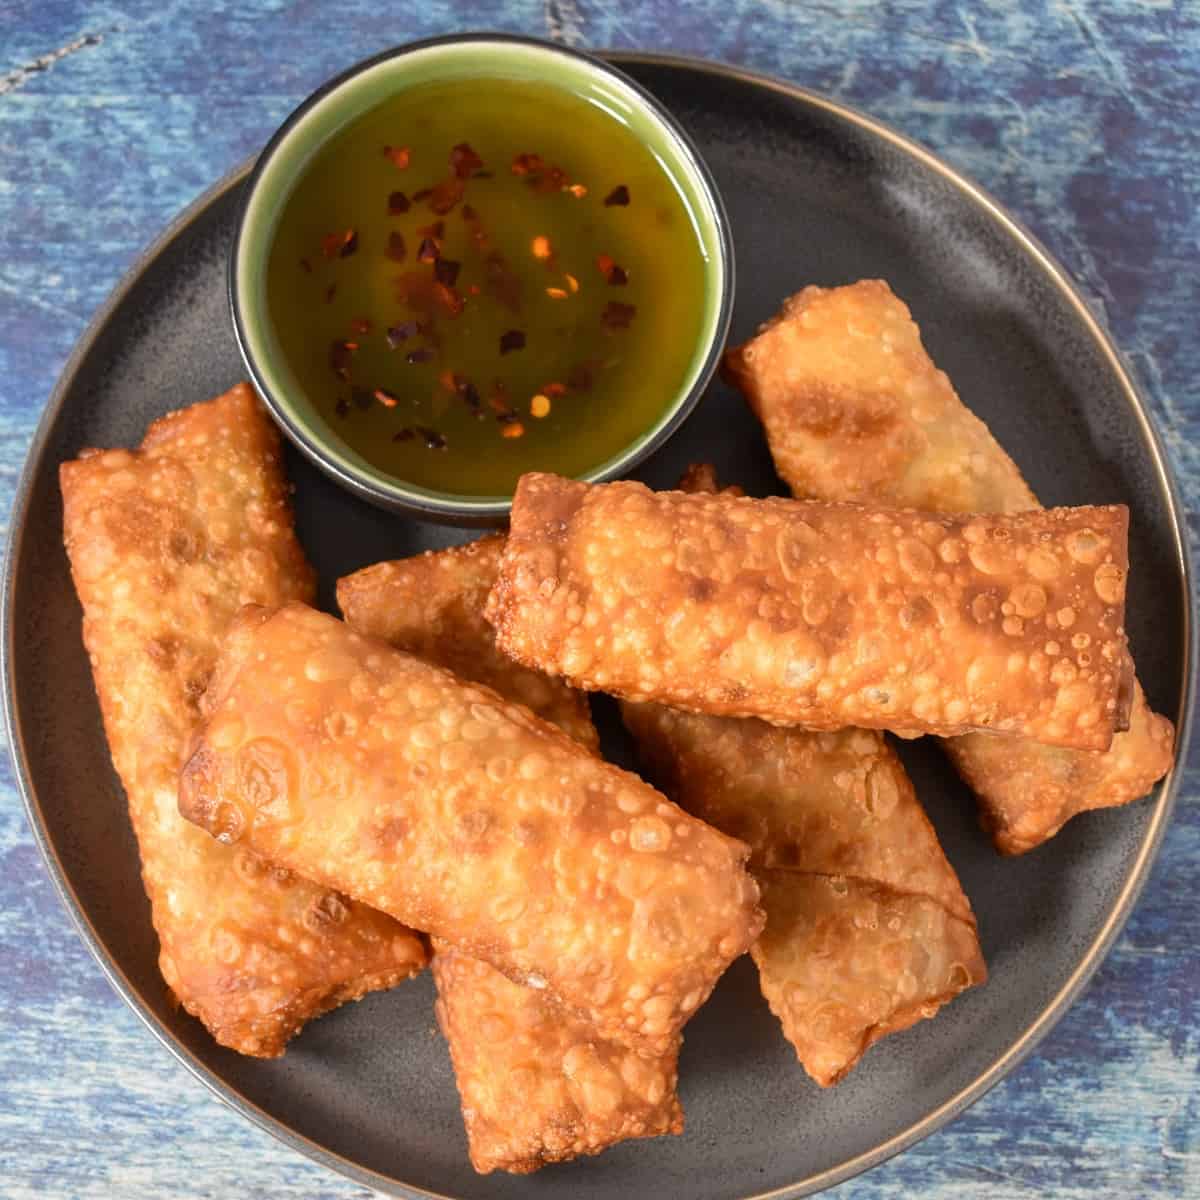 Six fried egg rolls arranged on a gray plate with a small bowl of sauce on the side.